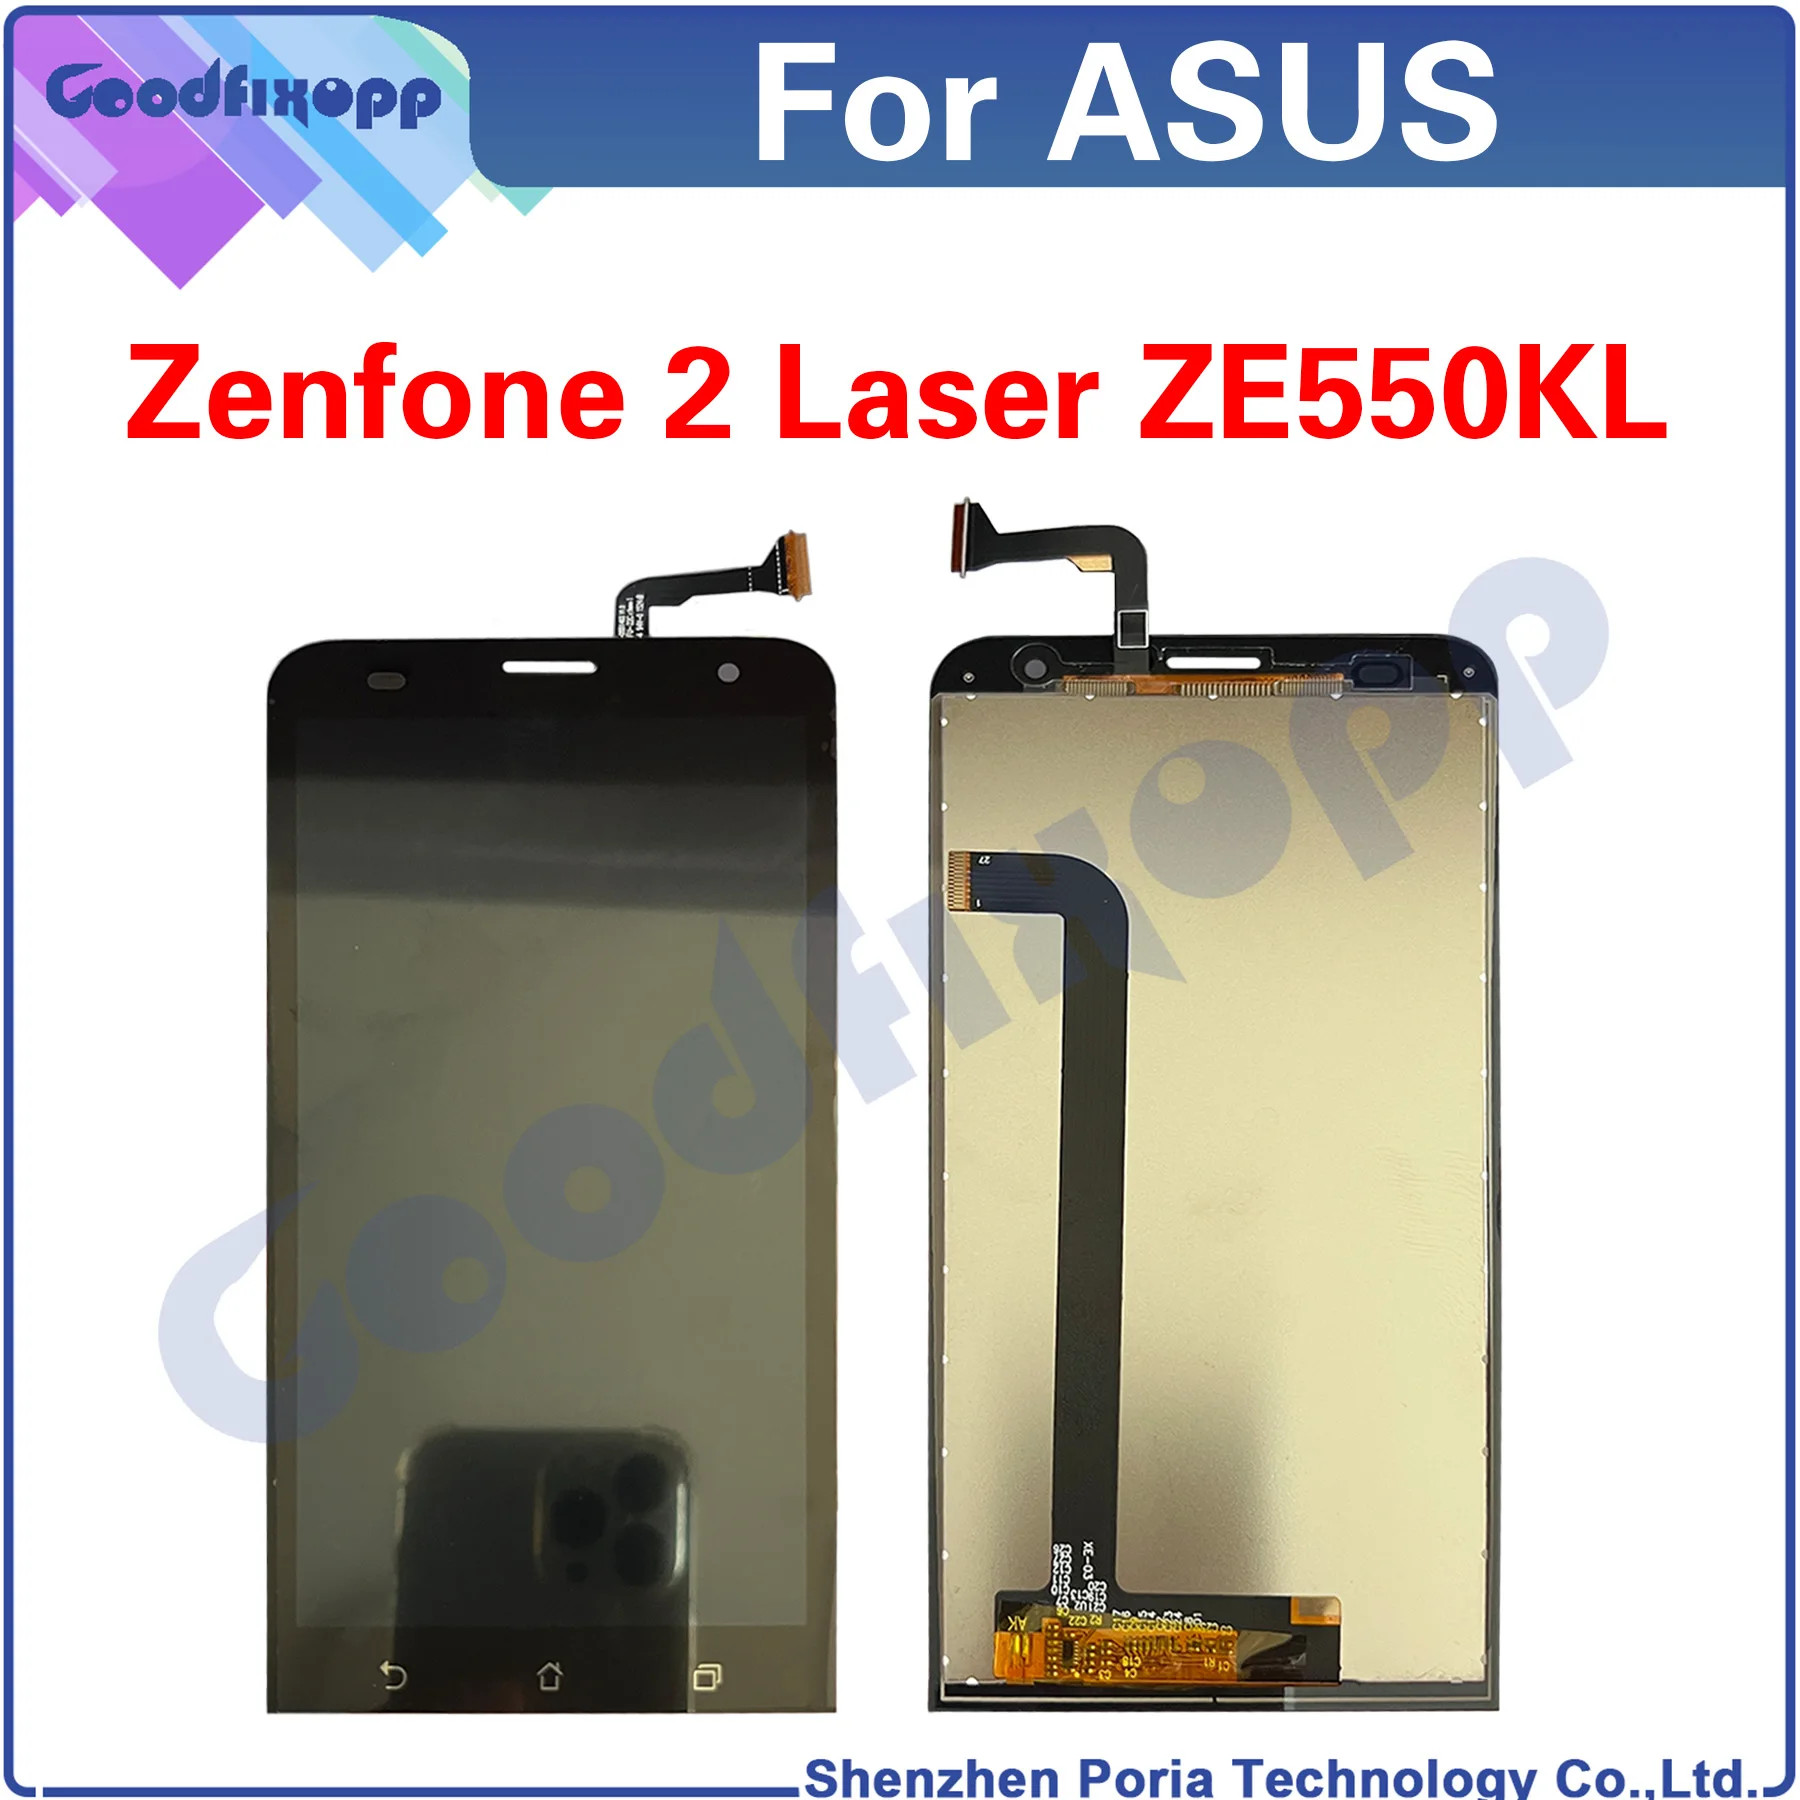 

For Asus Zenfone 2 Laser ZE550KL Z00LD Z00LDD LCD Display Touch Screen Digitizer Assembly Repair Parts Replacement